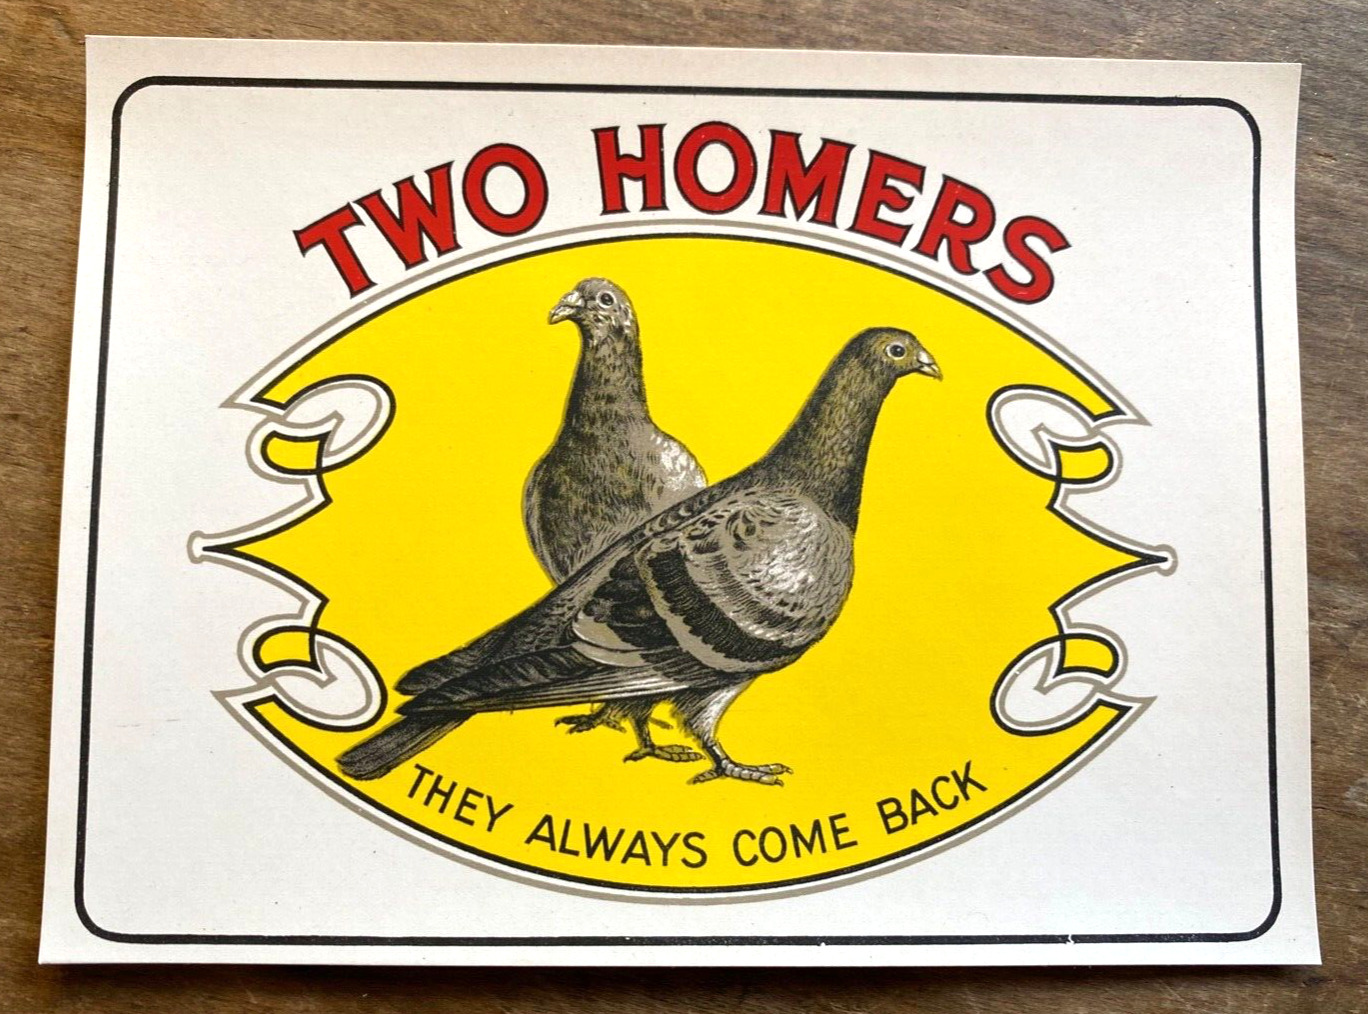 Old Vintage - TWO HOMERS - CIGAR Box LABEL - Outer -  Homing Pigeons. Original.